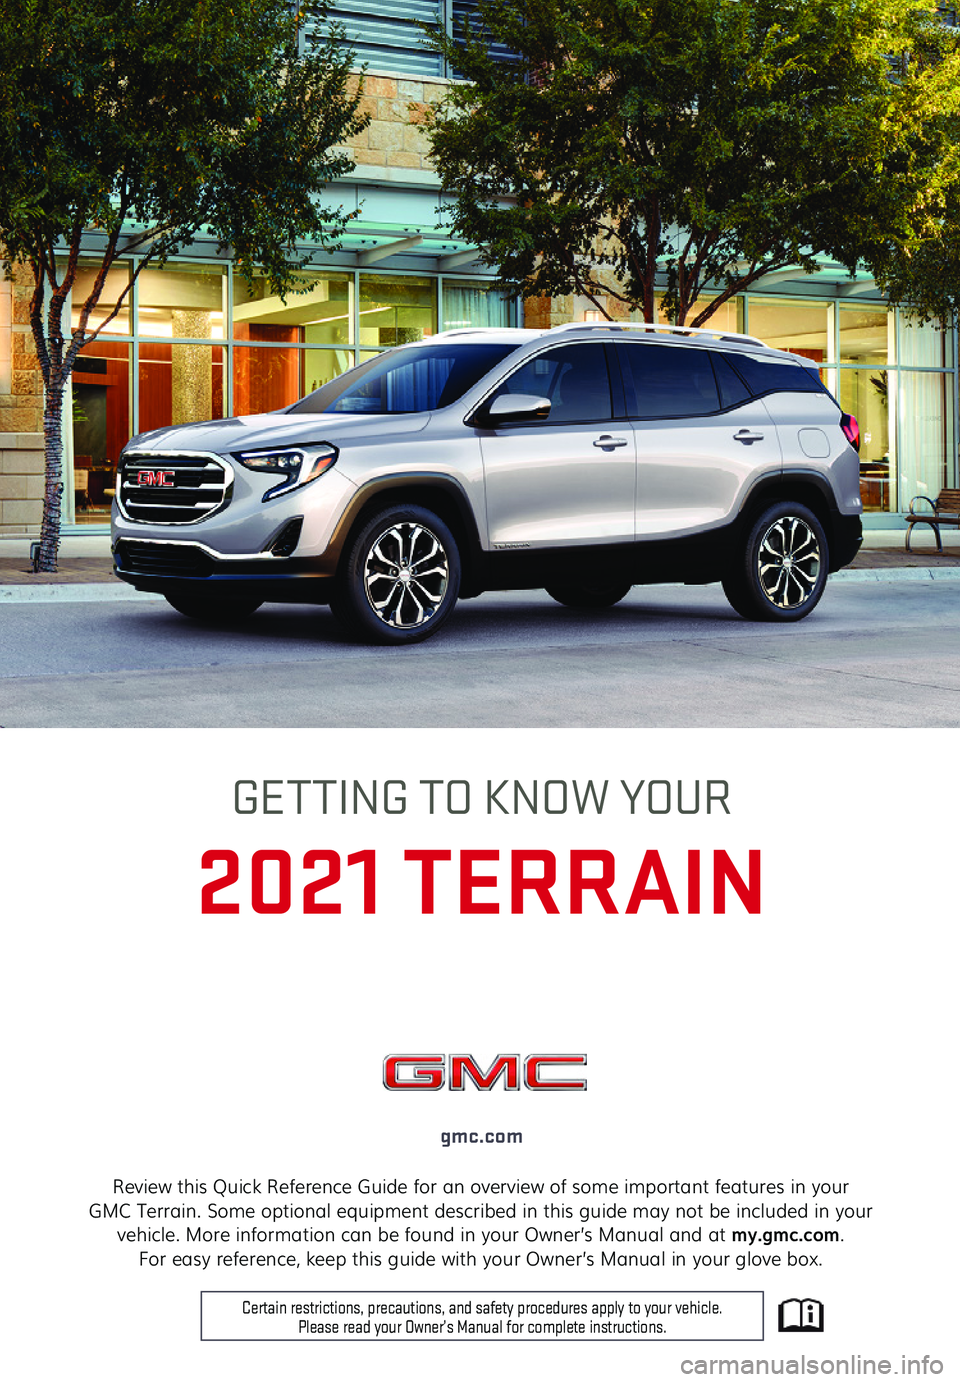 GMC TERRAIN 2021  Get To Know Guide 